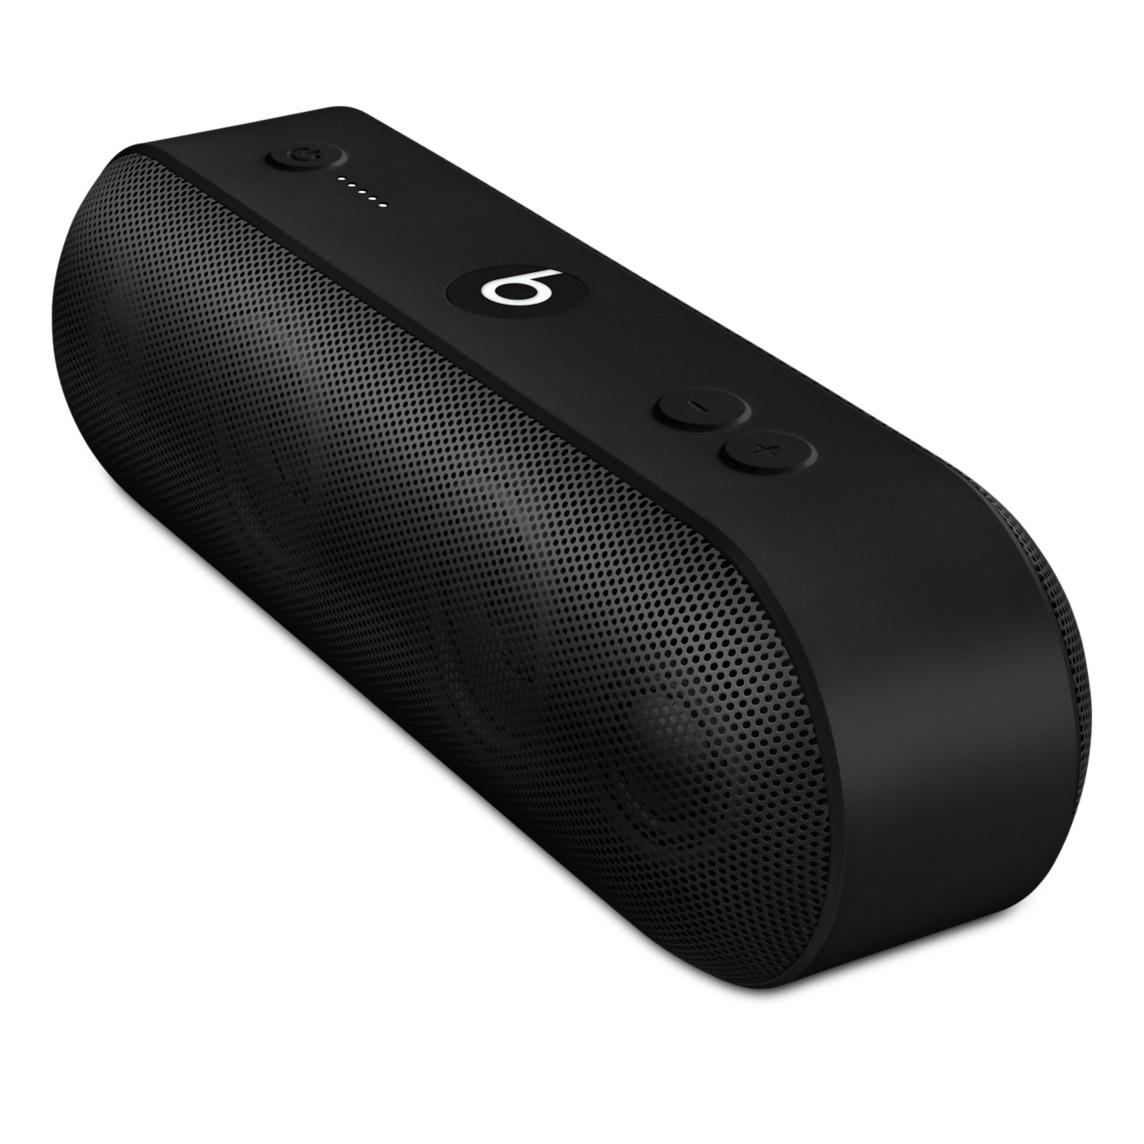 Apple Beats Pill+ Bluetooth Speaker On Sale for 37% Off [Deal]